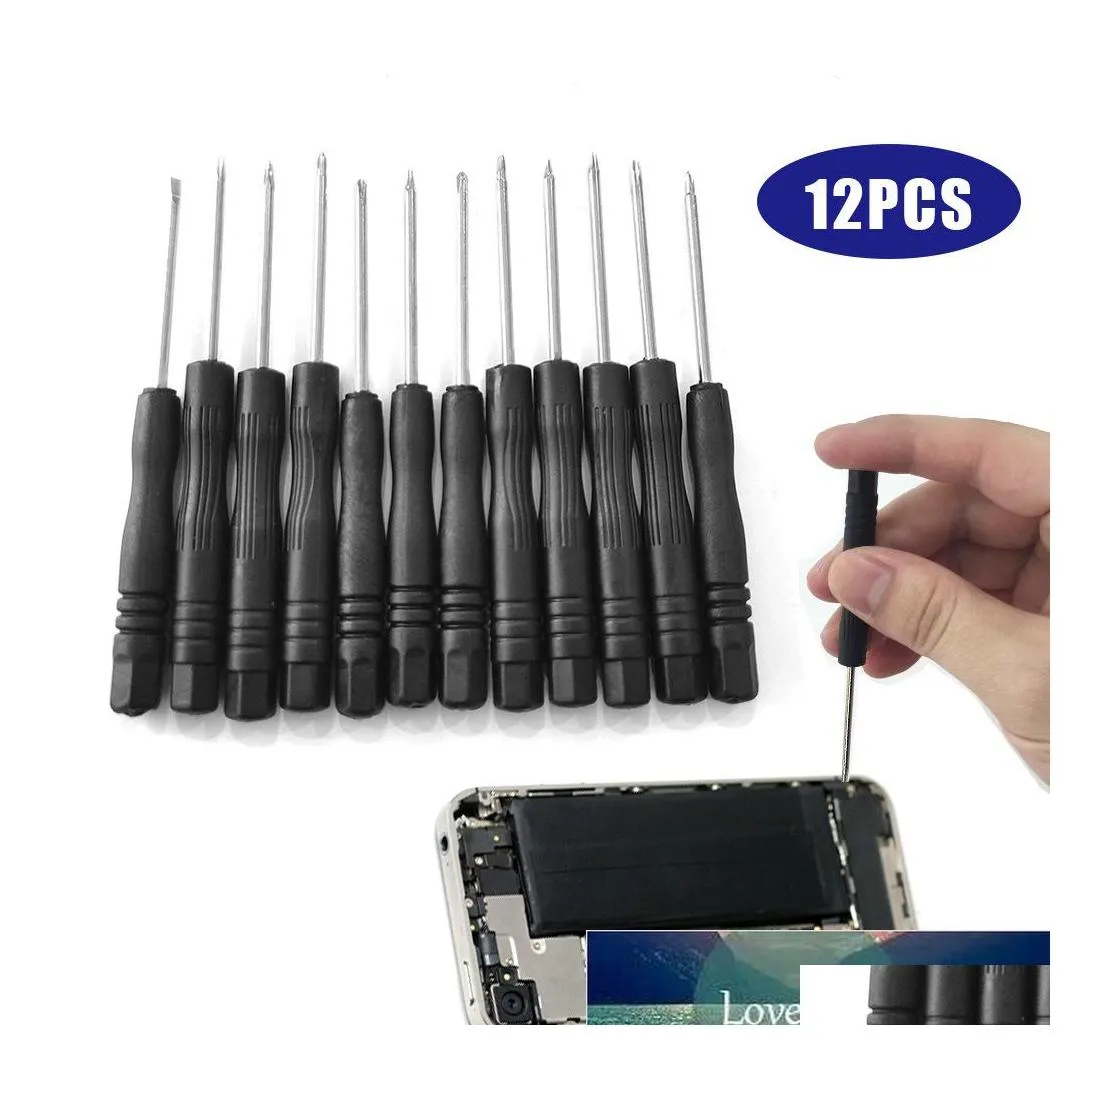 Other Household Sundries 12Pcs 2.0 Cross Small Screwdriver Toy 2Mm Word Gift Mobile Phone Disassembly Screw Batch Driver Se Drop Del Otgsv